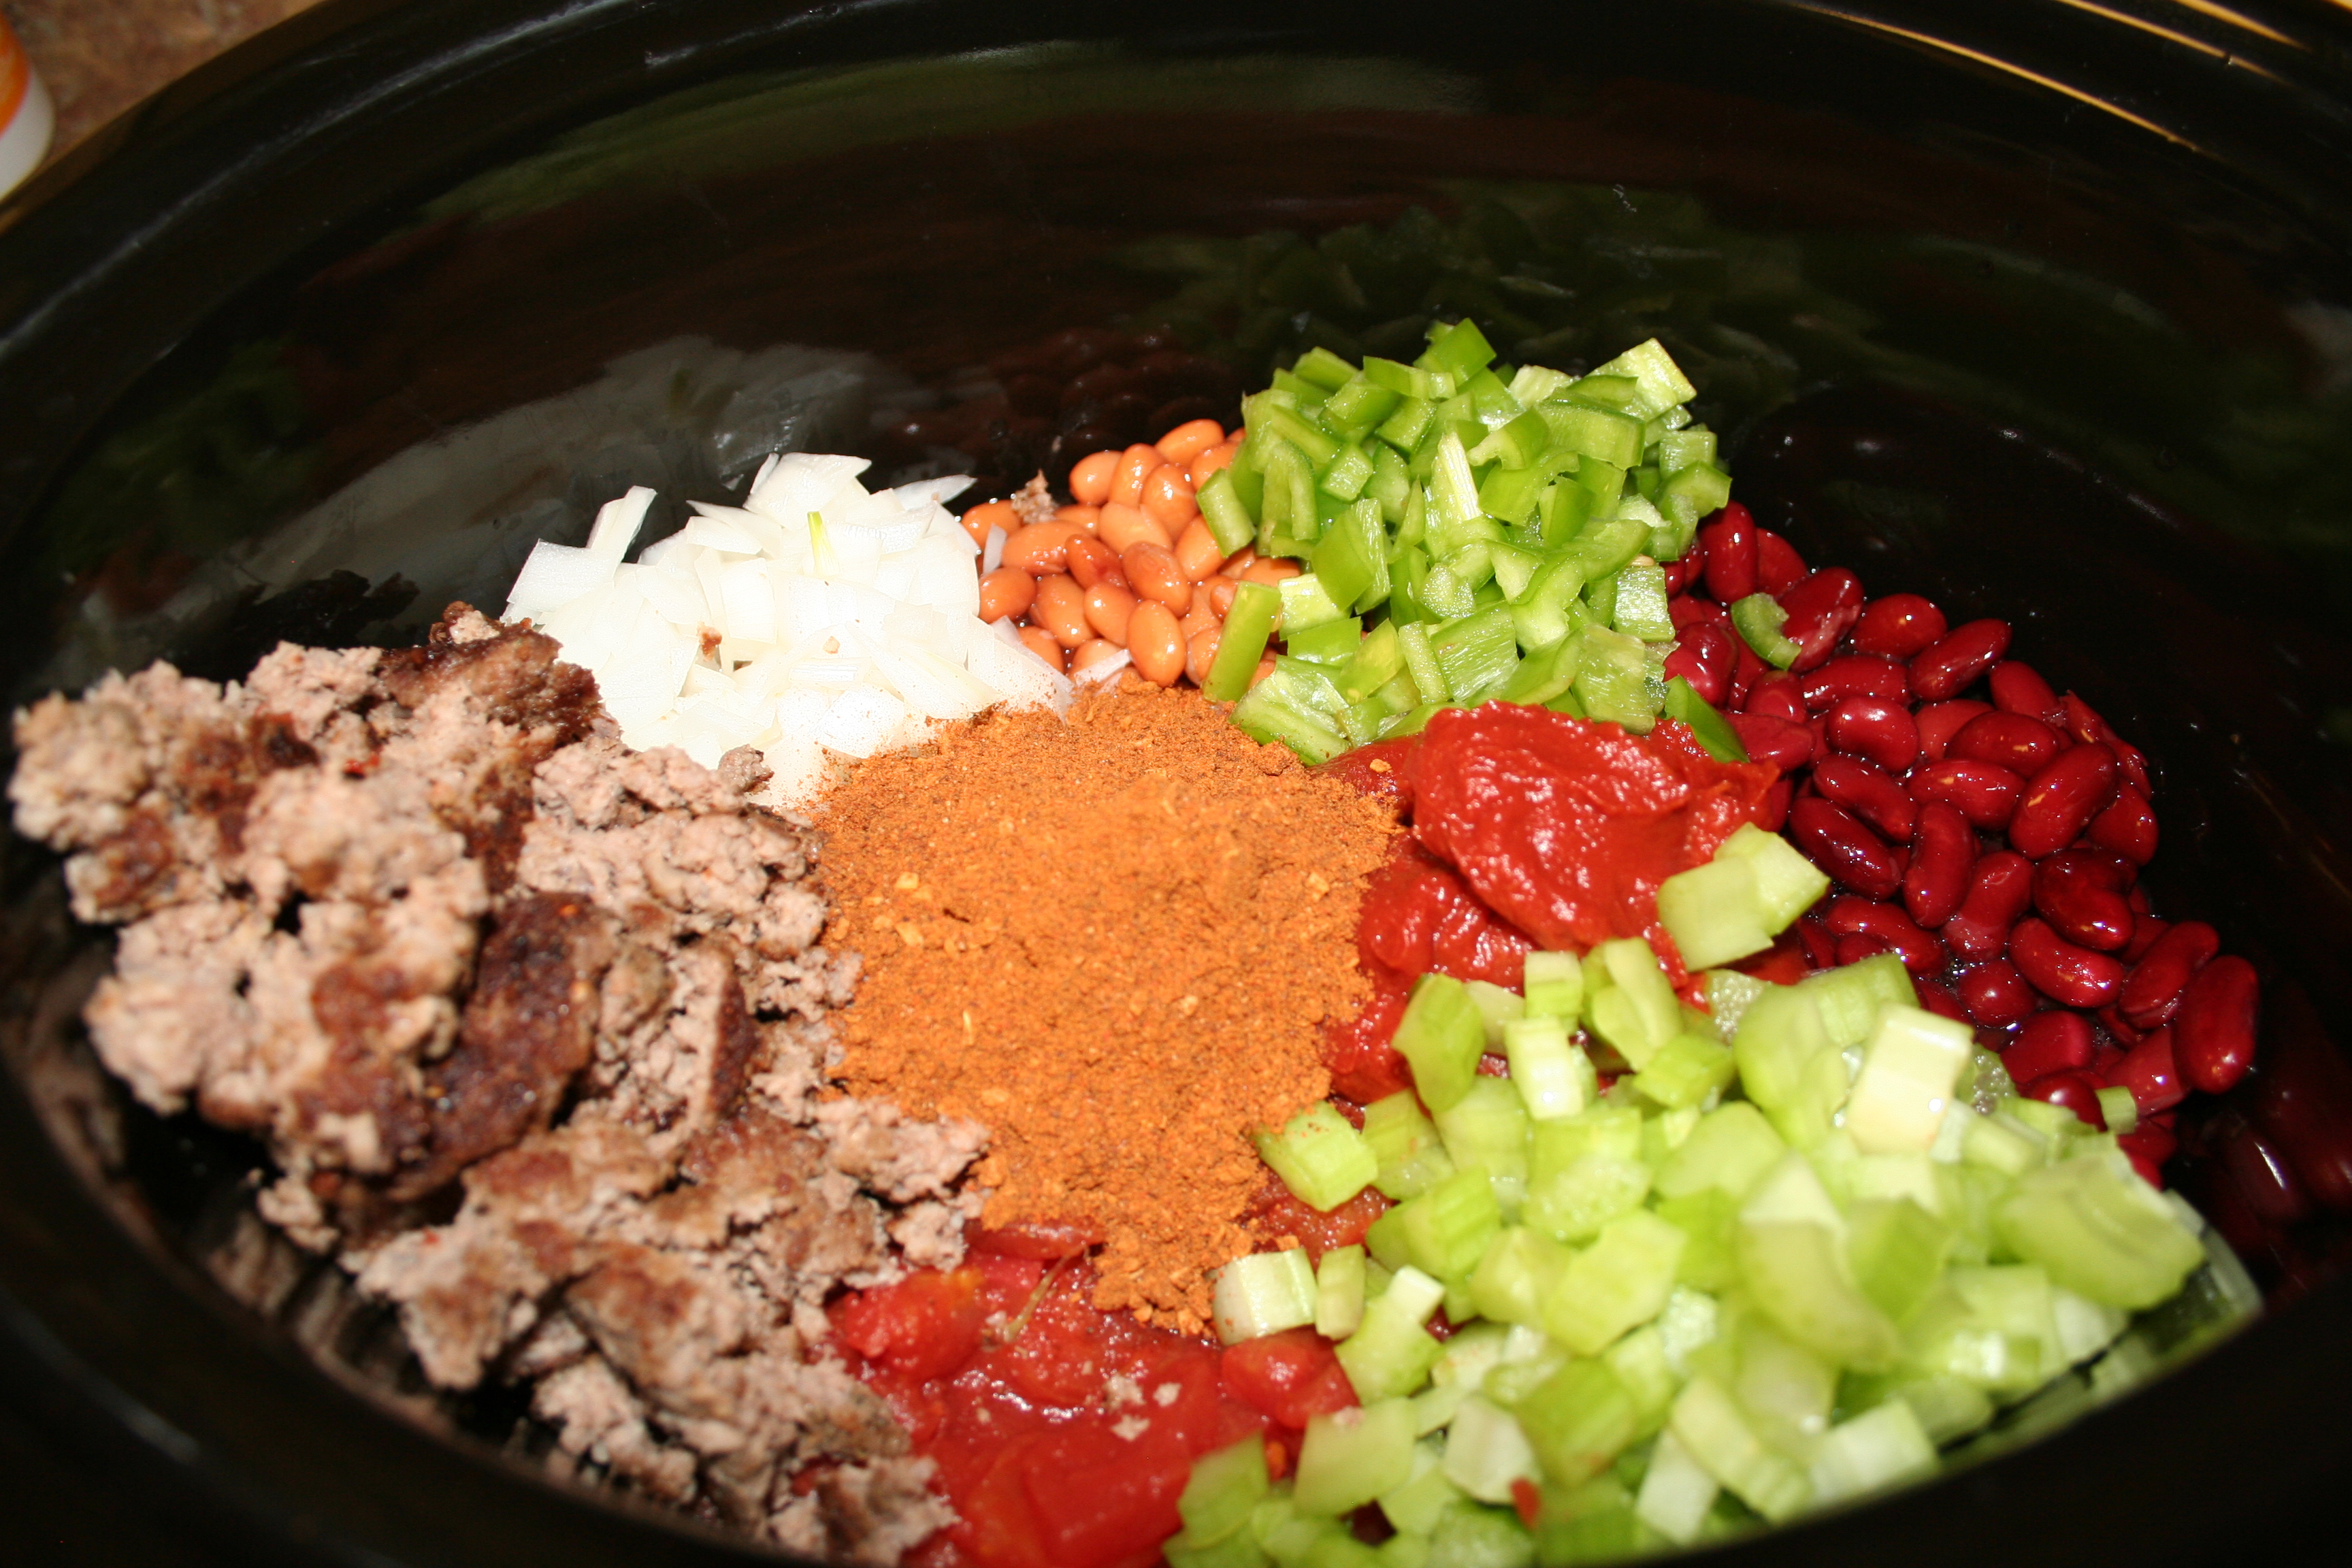 Copycat Wendy S Chili Recipe The Magical Slow Cooker